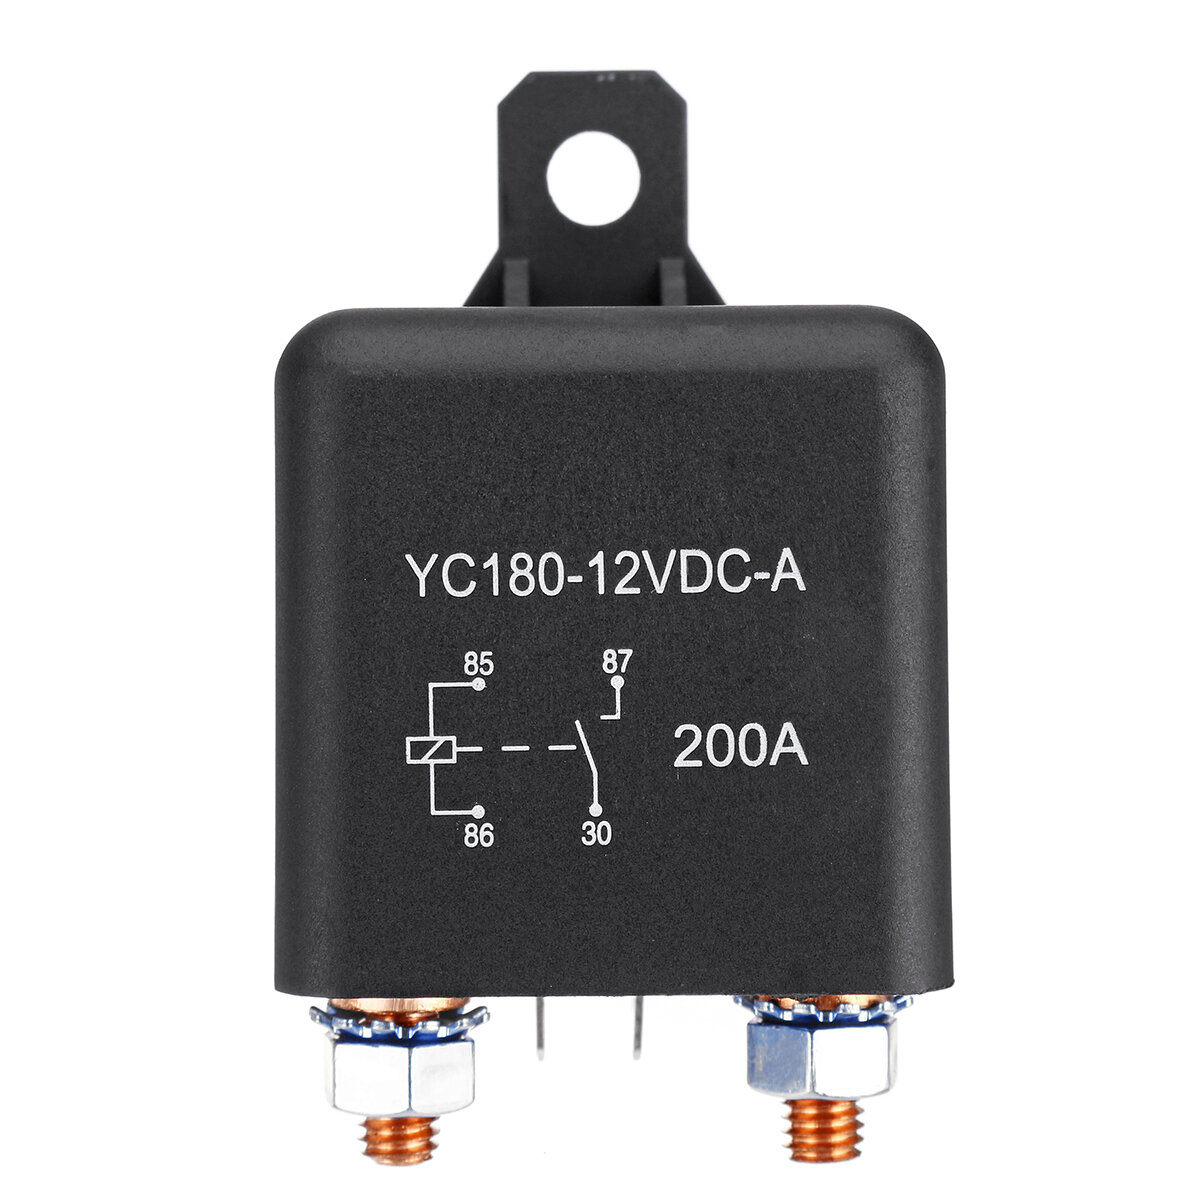 12v 200a on/off relay switch heavy duty split charge 4-pin terminals for car auto boat van